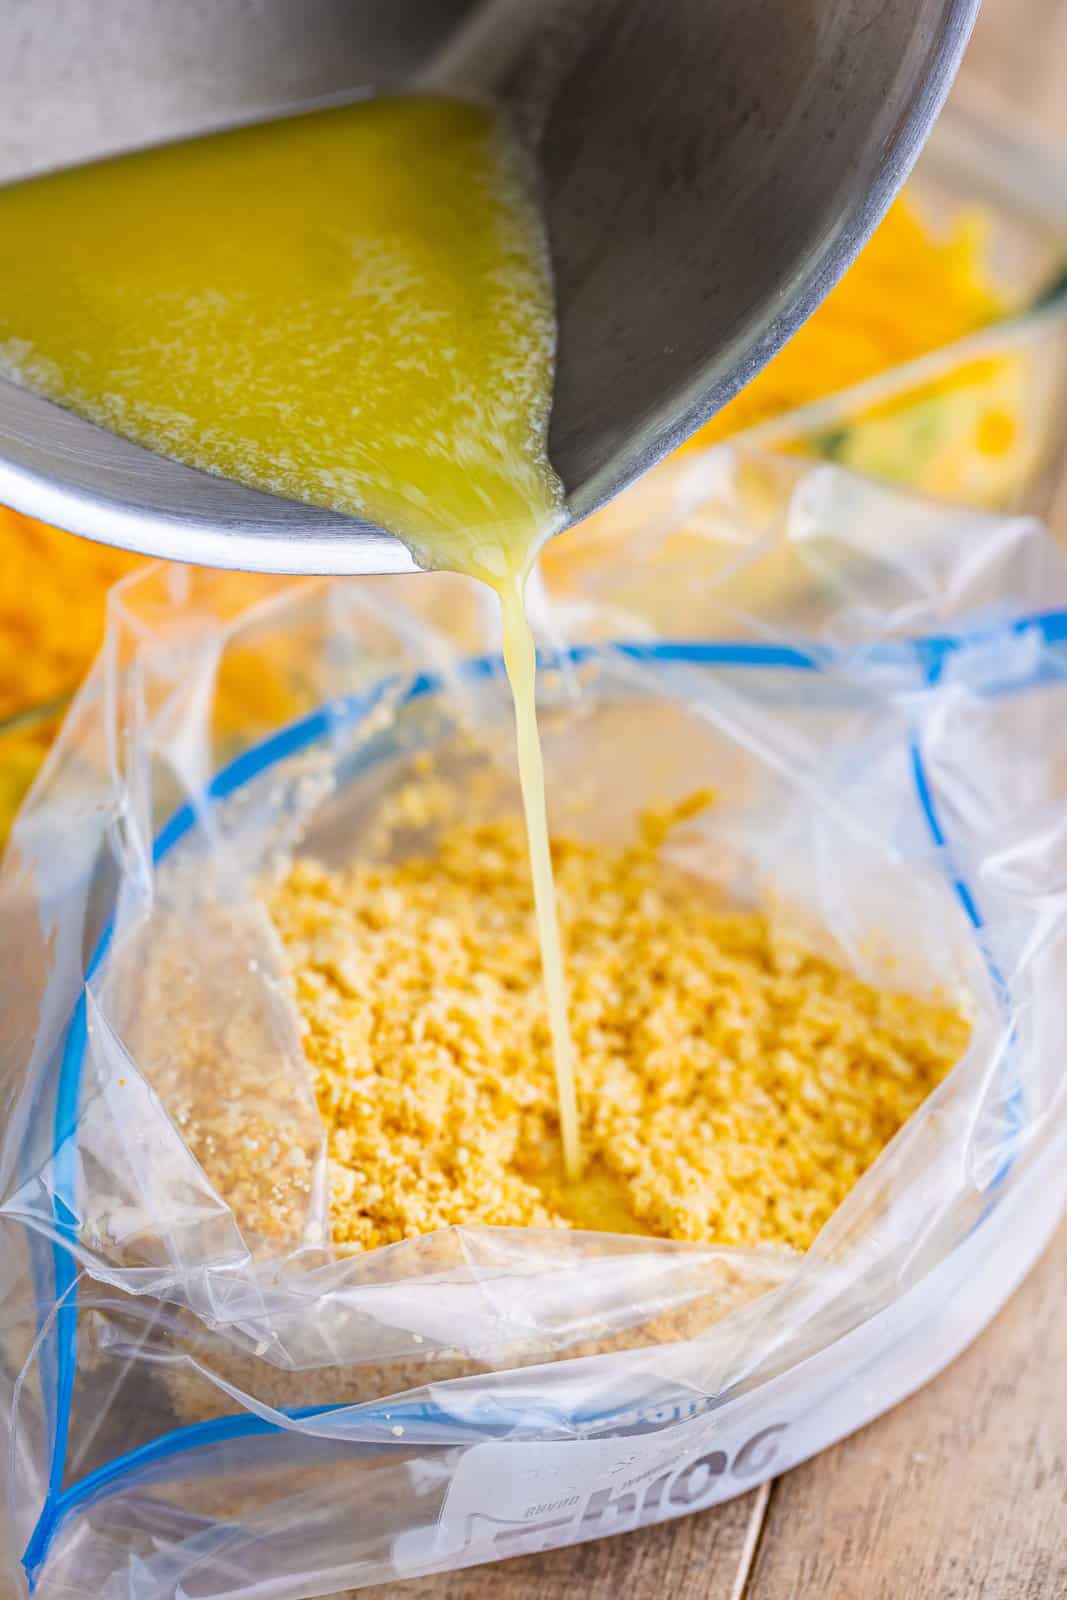 Some melted butter being poured into a bag of crushed crackers.